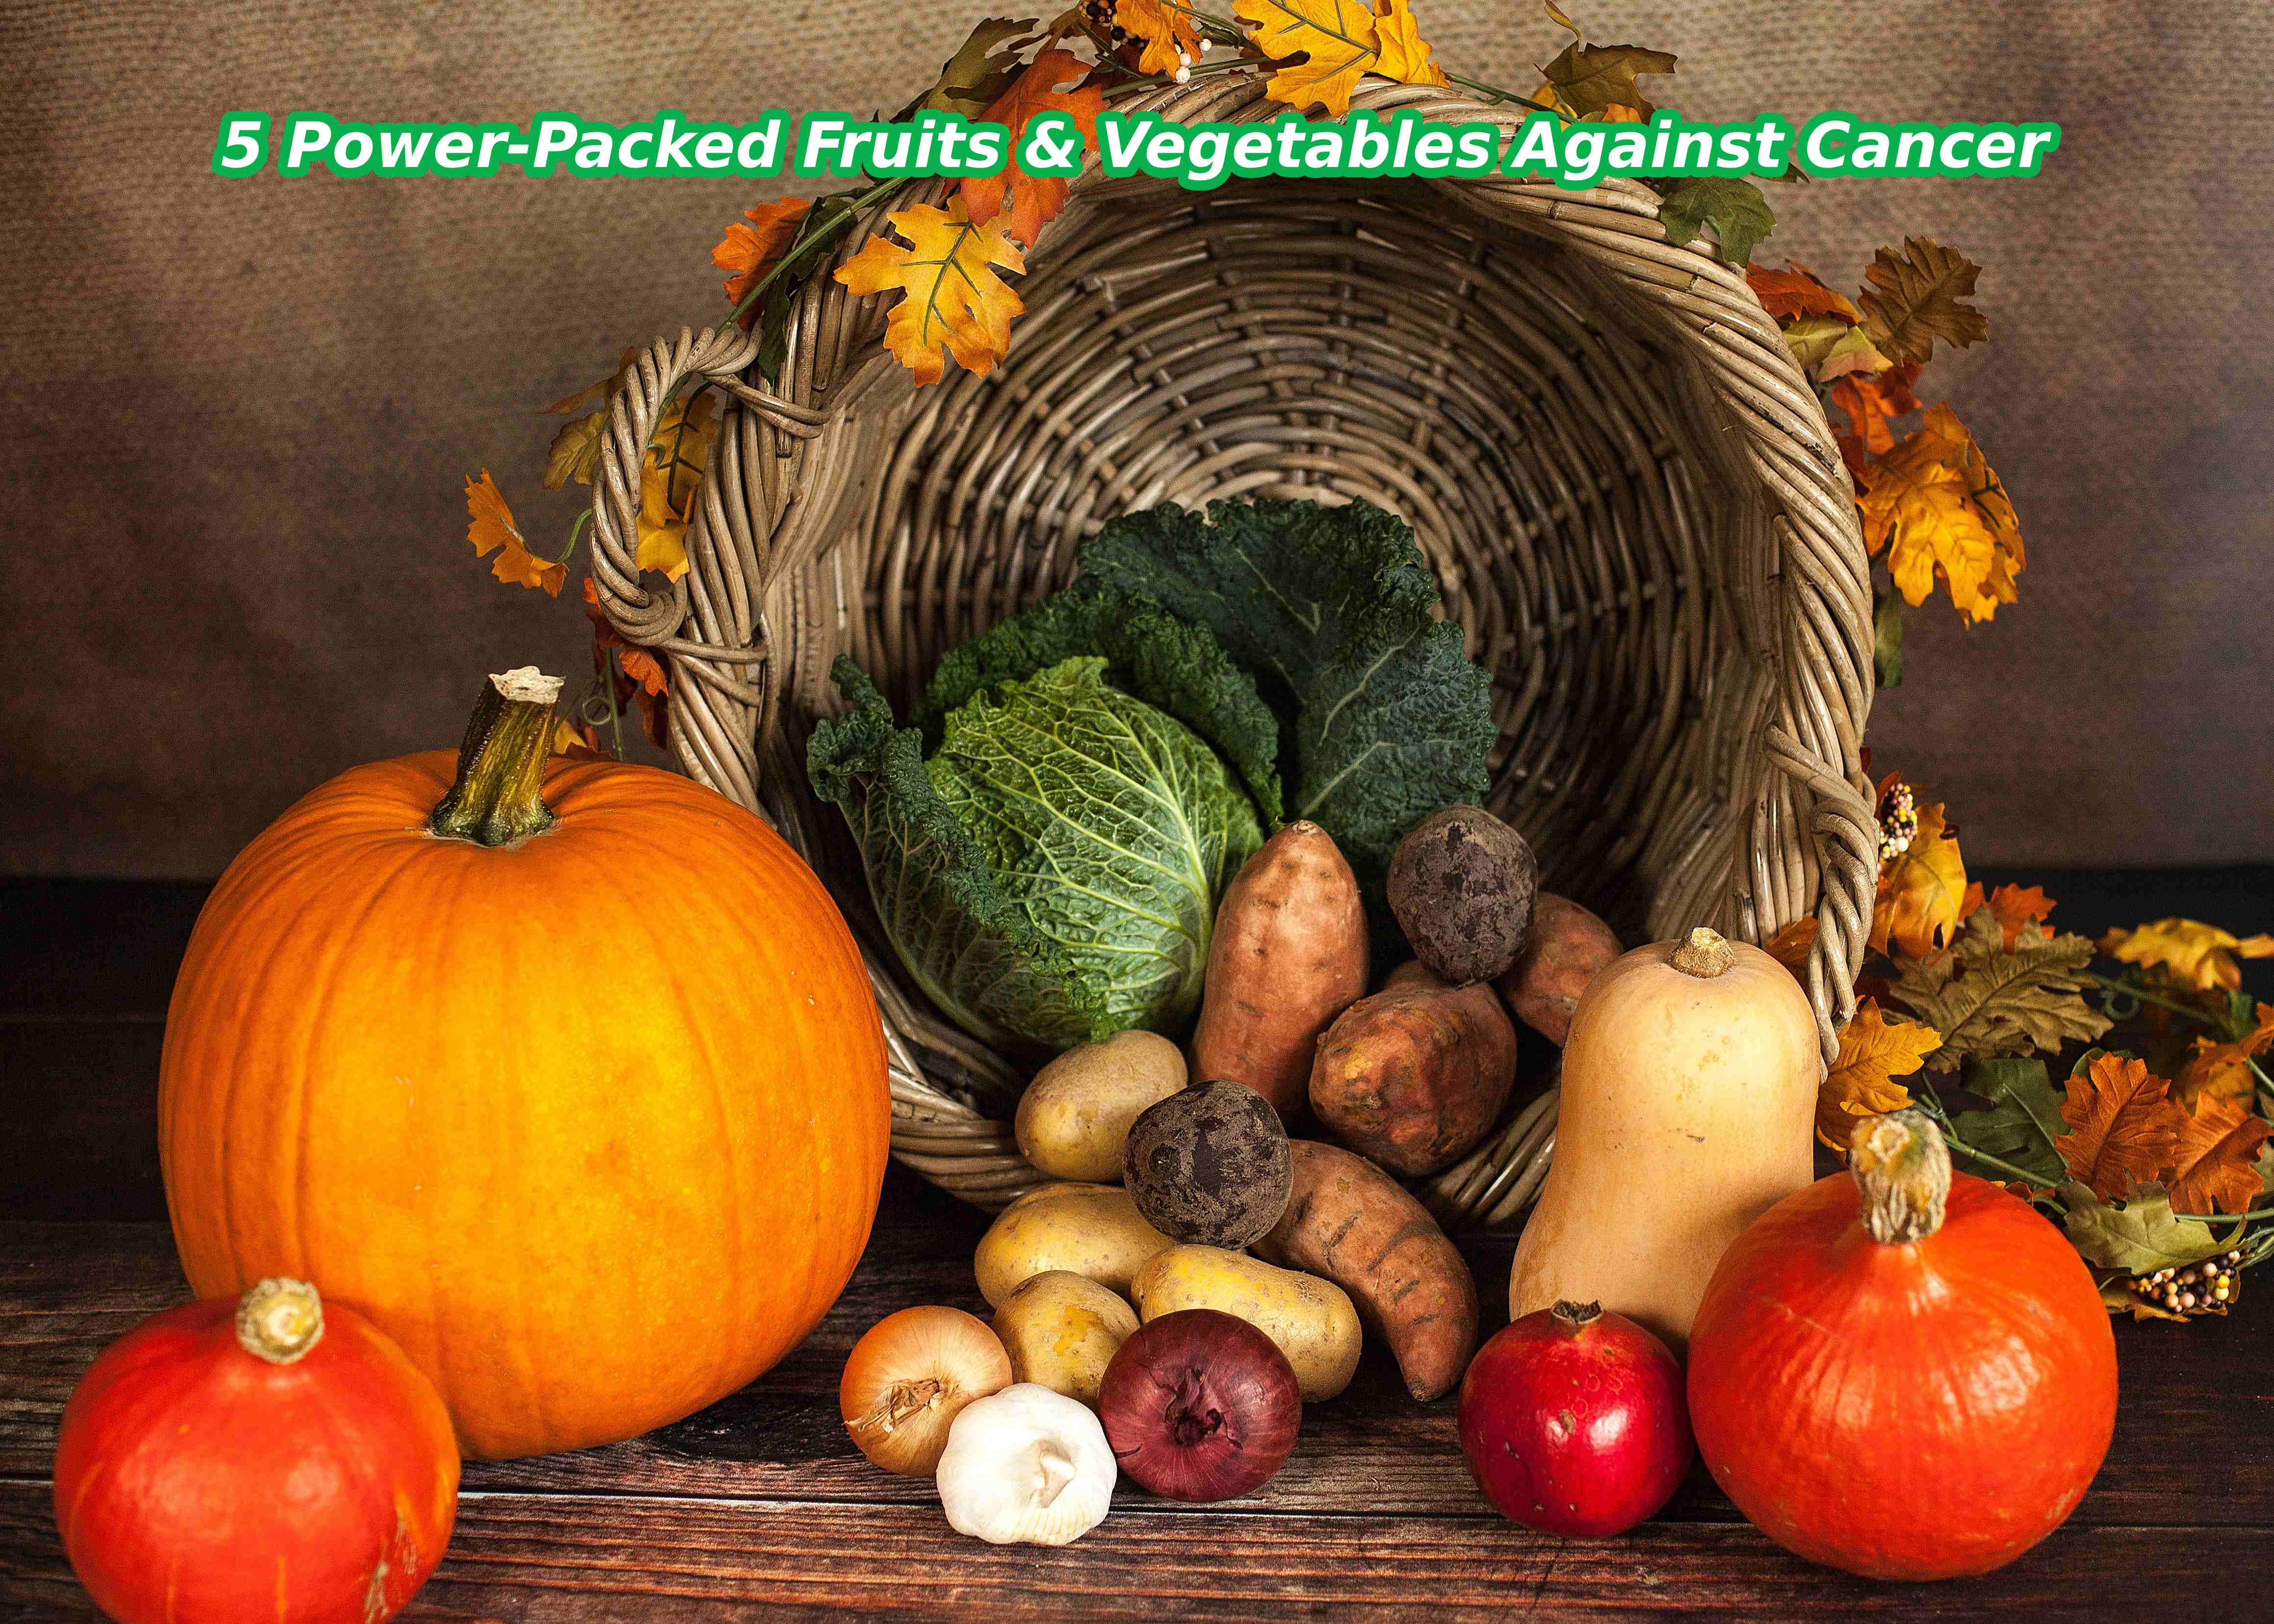 5 Power-Packed Fruits & Vegetables Against Cancer